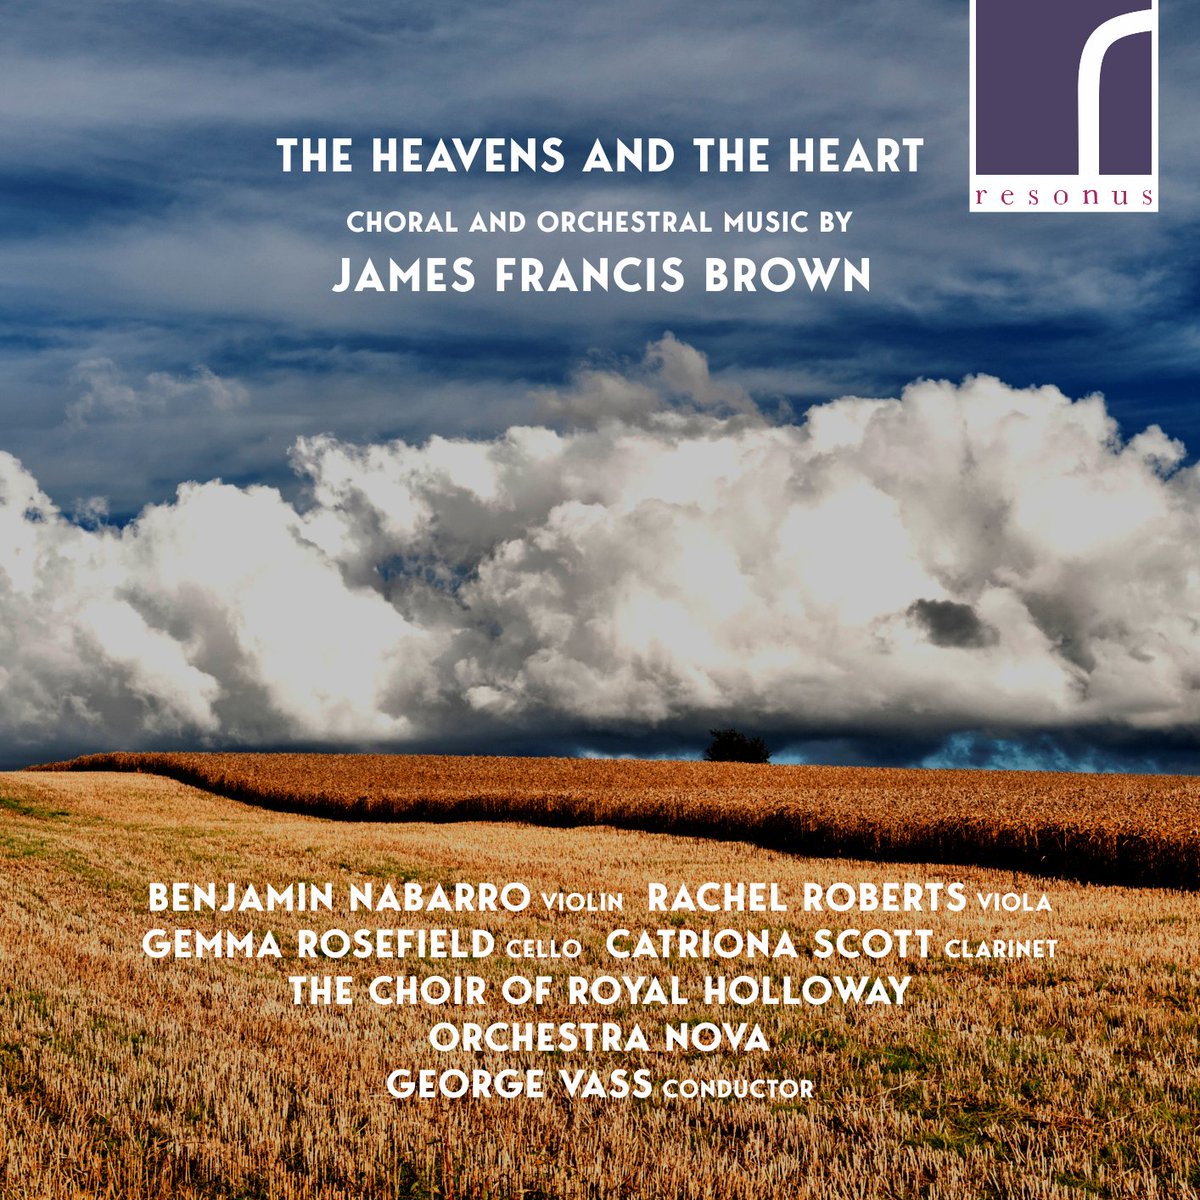 Orchestra Nova's latest release on @resonusclassics  – 3 premiere recordings of works by @JFBMusic, featuring Catriona Scott, @Benjaminnabarro @RachelRJRvla @GemmaRosefield and @RHULChapelChoir.  Available to pre-order now ...
amzn.to/2AeOcmW